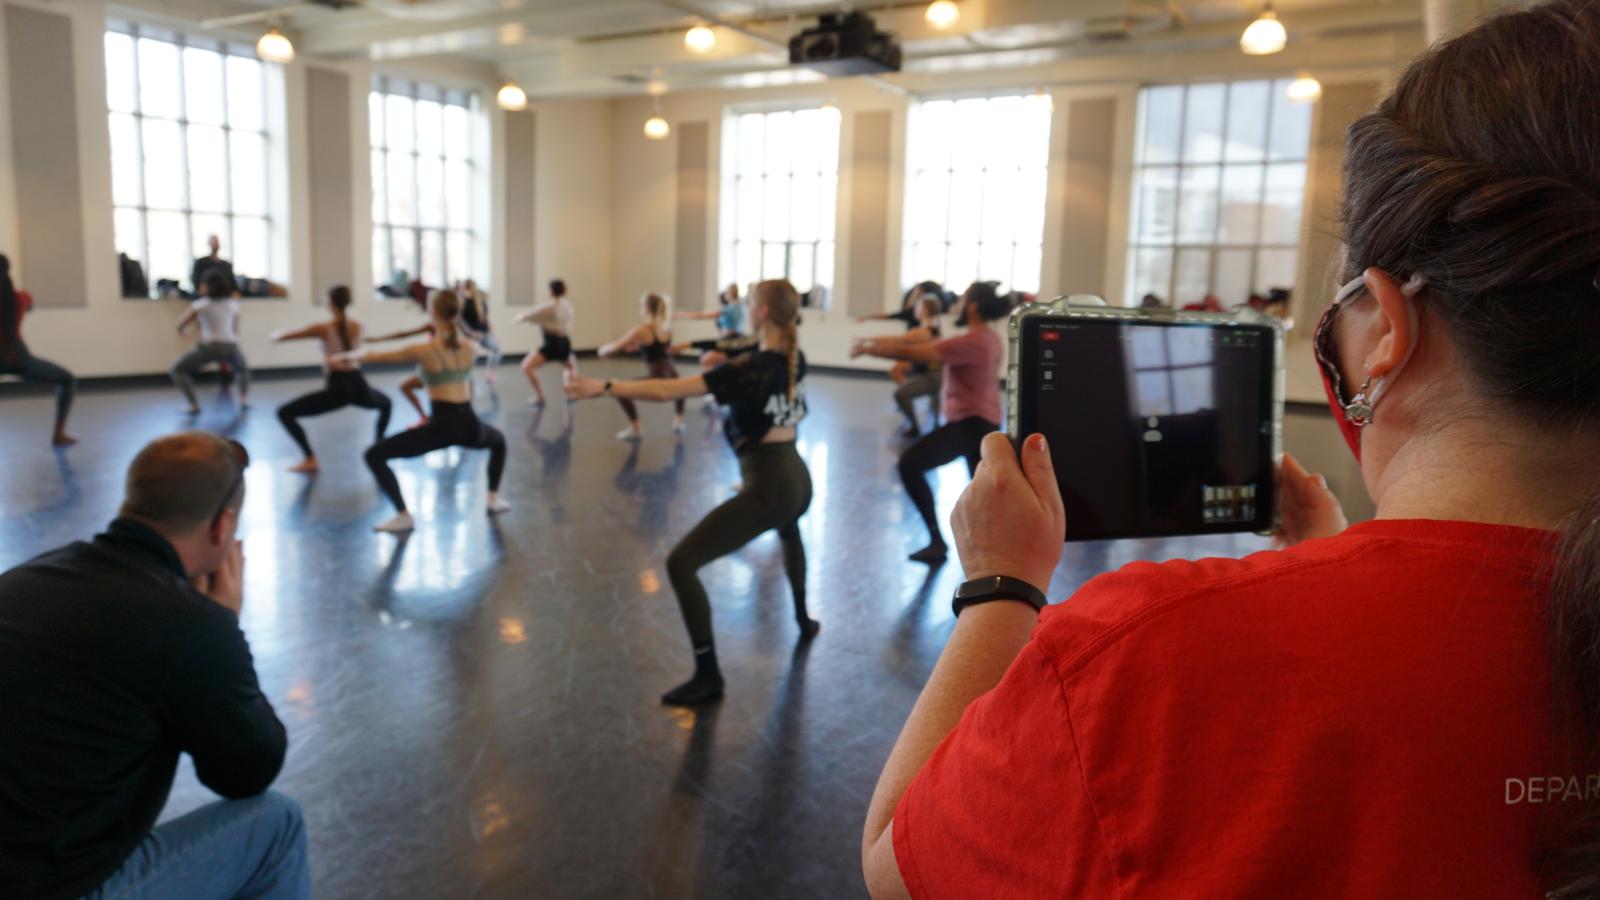 Dancers rehearsing in a studio while woman records